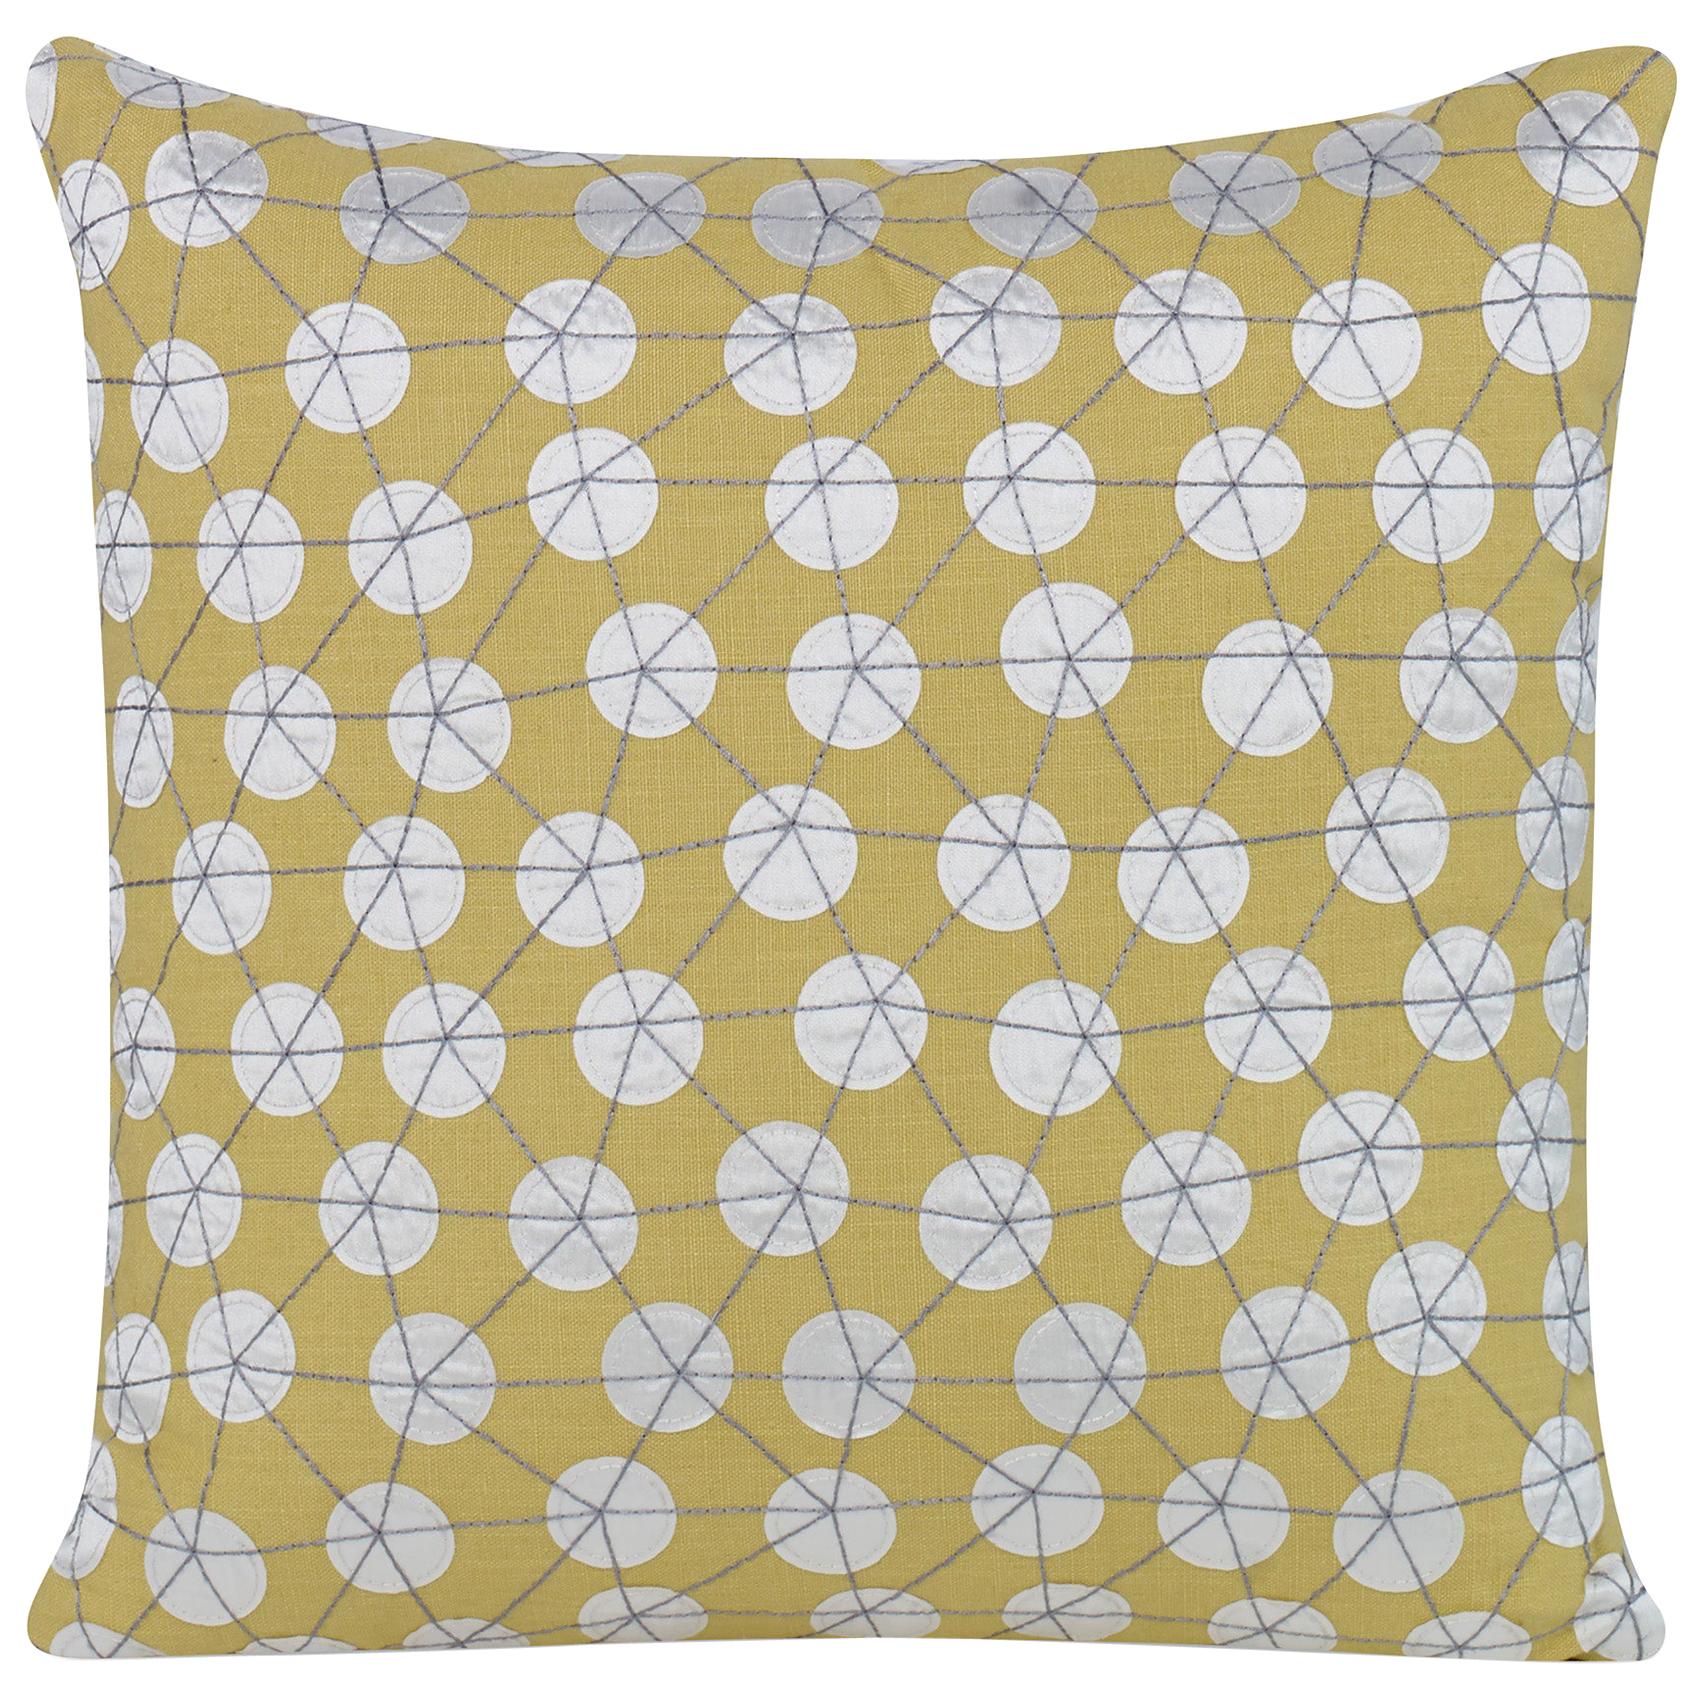 Goaround Pillow in Yellow and White by CuratedKravet